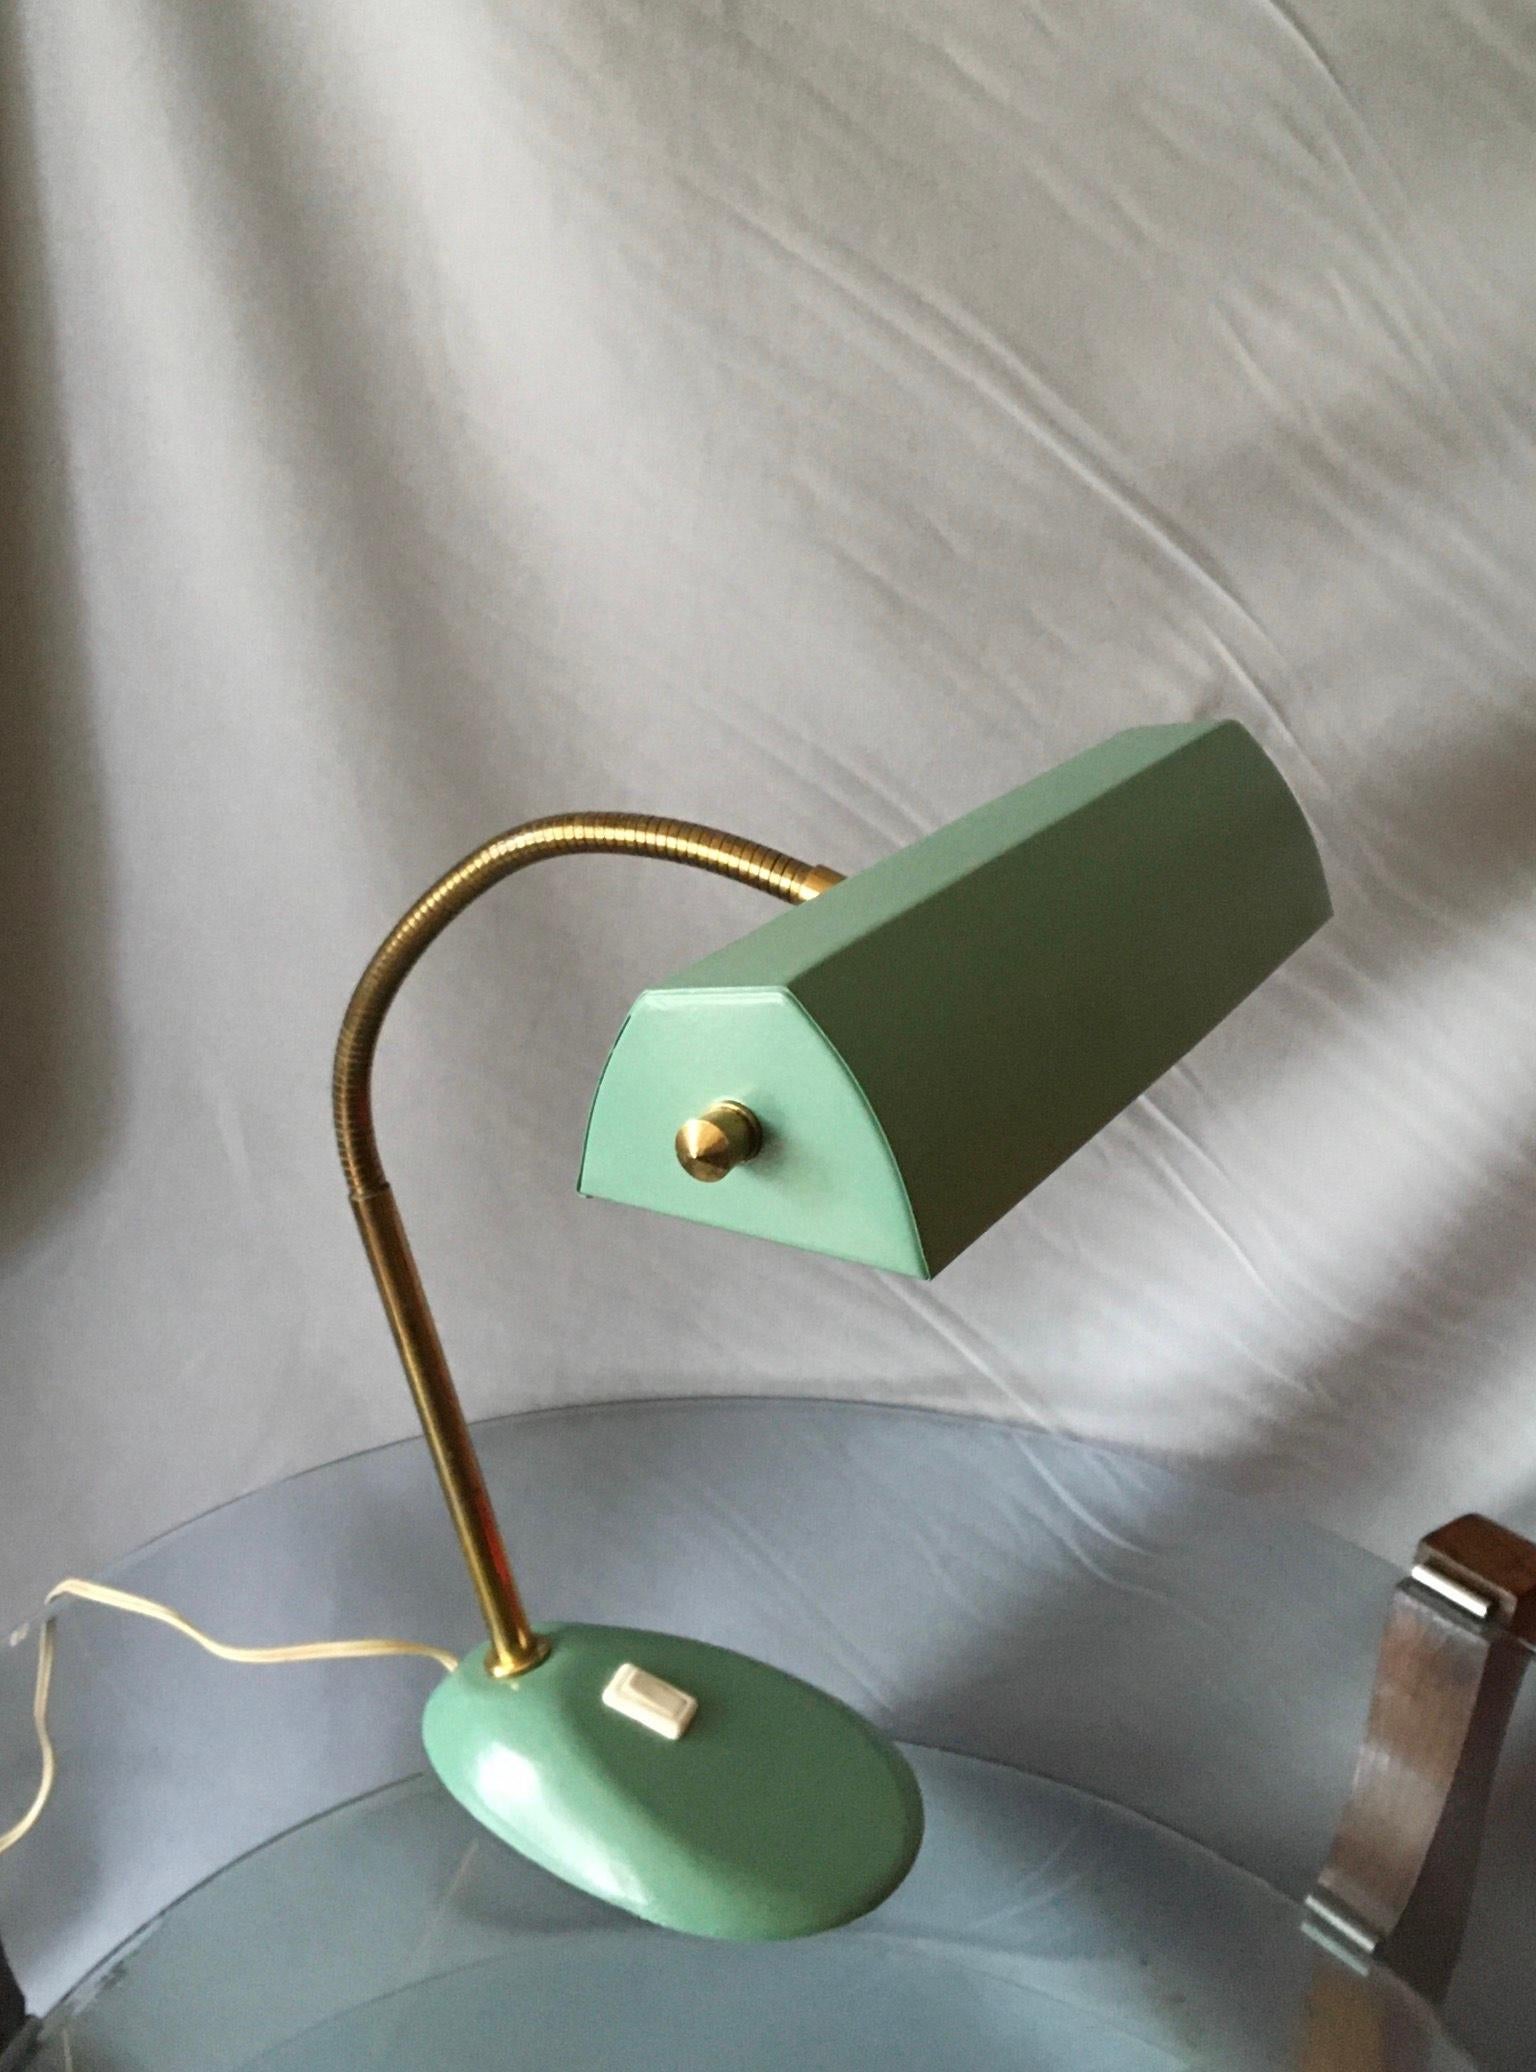 Beautiful French design mid 50’s lamp lacquered celadon green ( surf green ).
The multidirectional reflector is mounted on a flexible brass arm fixed on a cast iron base for the most stability.
The electrical parts have been checked and fit the US